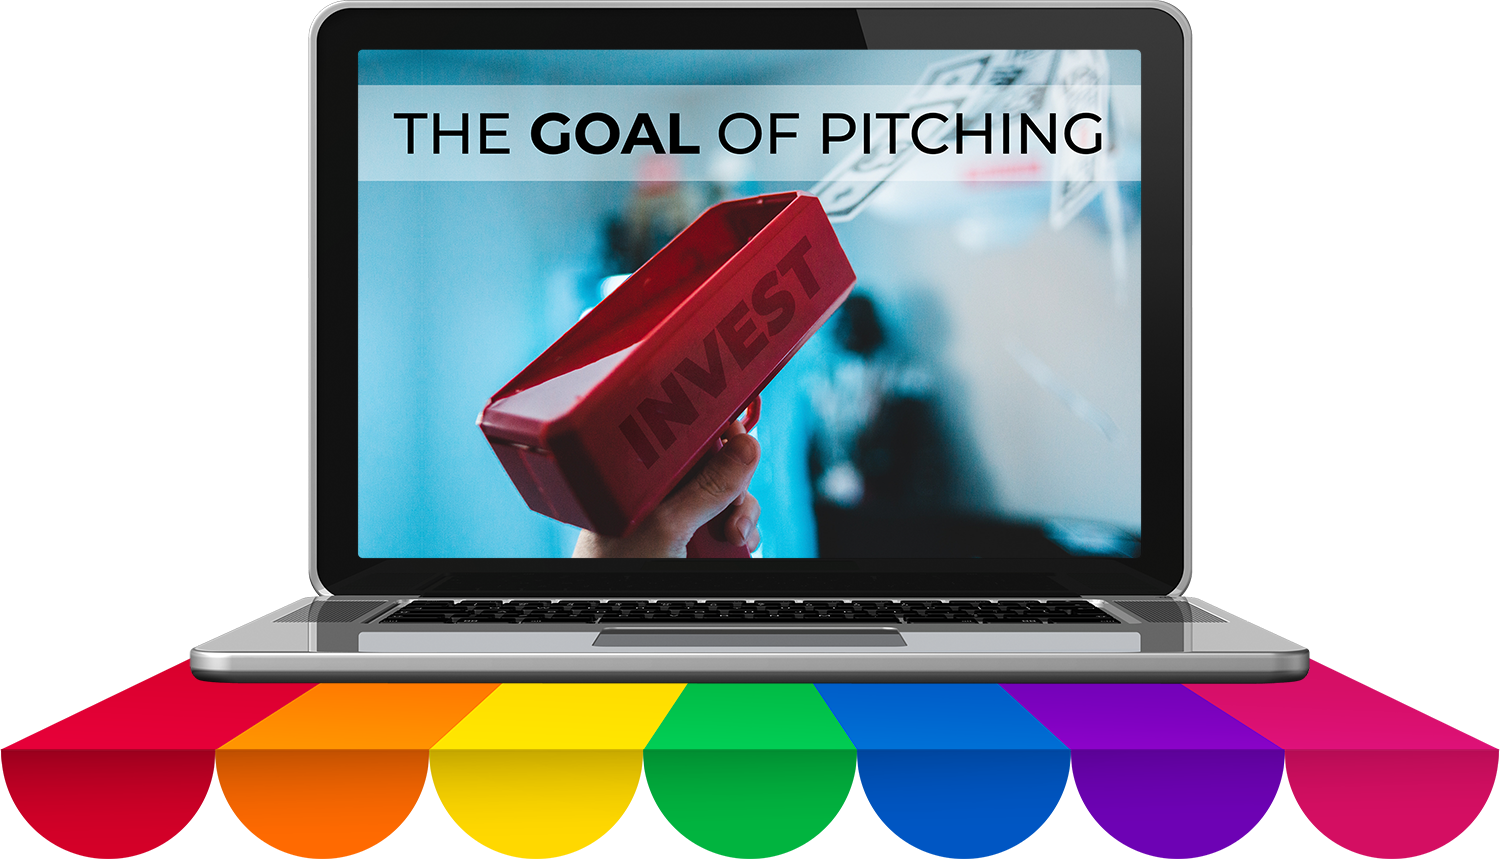 "The Goal of Pitching" slide from The Art of Pitching Class